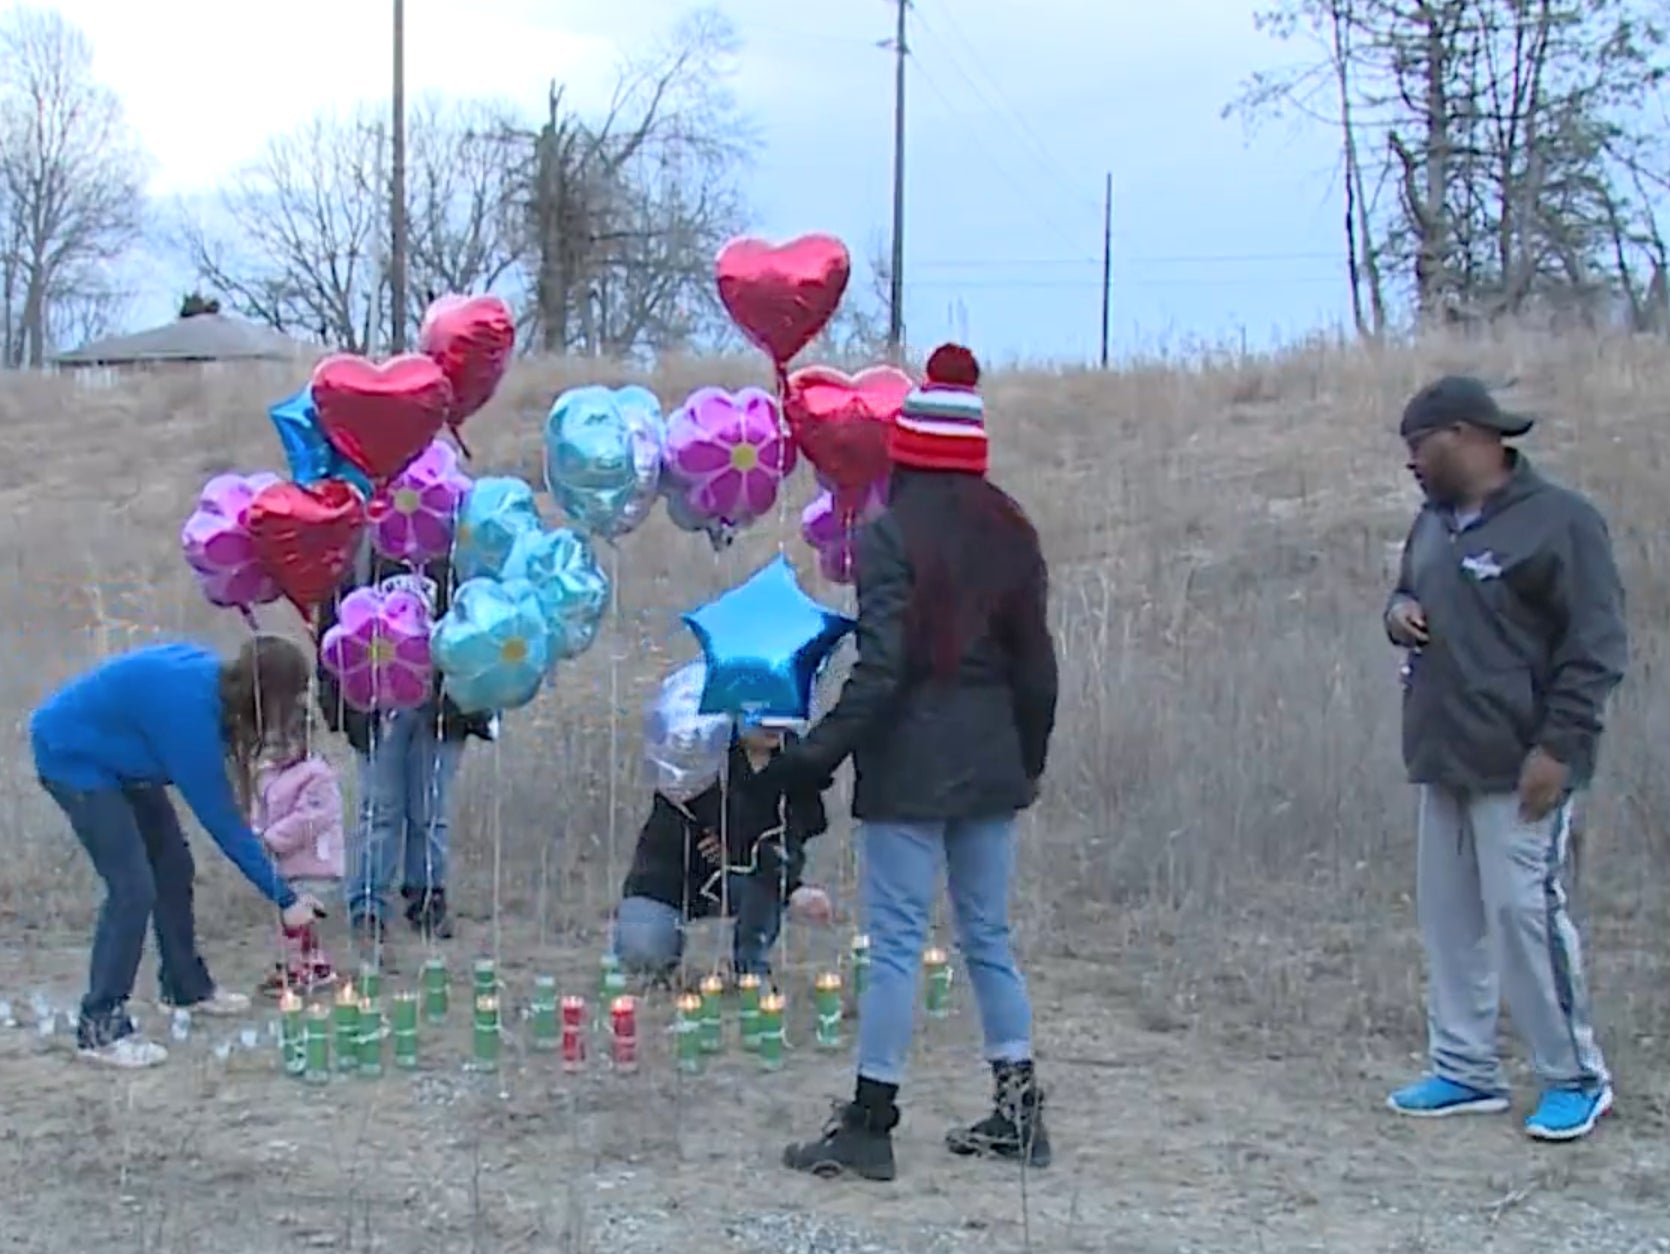 The family of Christina King, who was murdered in 1998, gather in Kansas City in 2021 to place candles and balloons in her memory